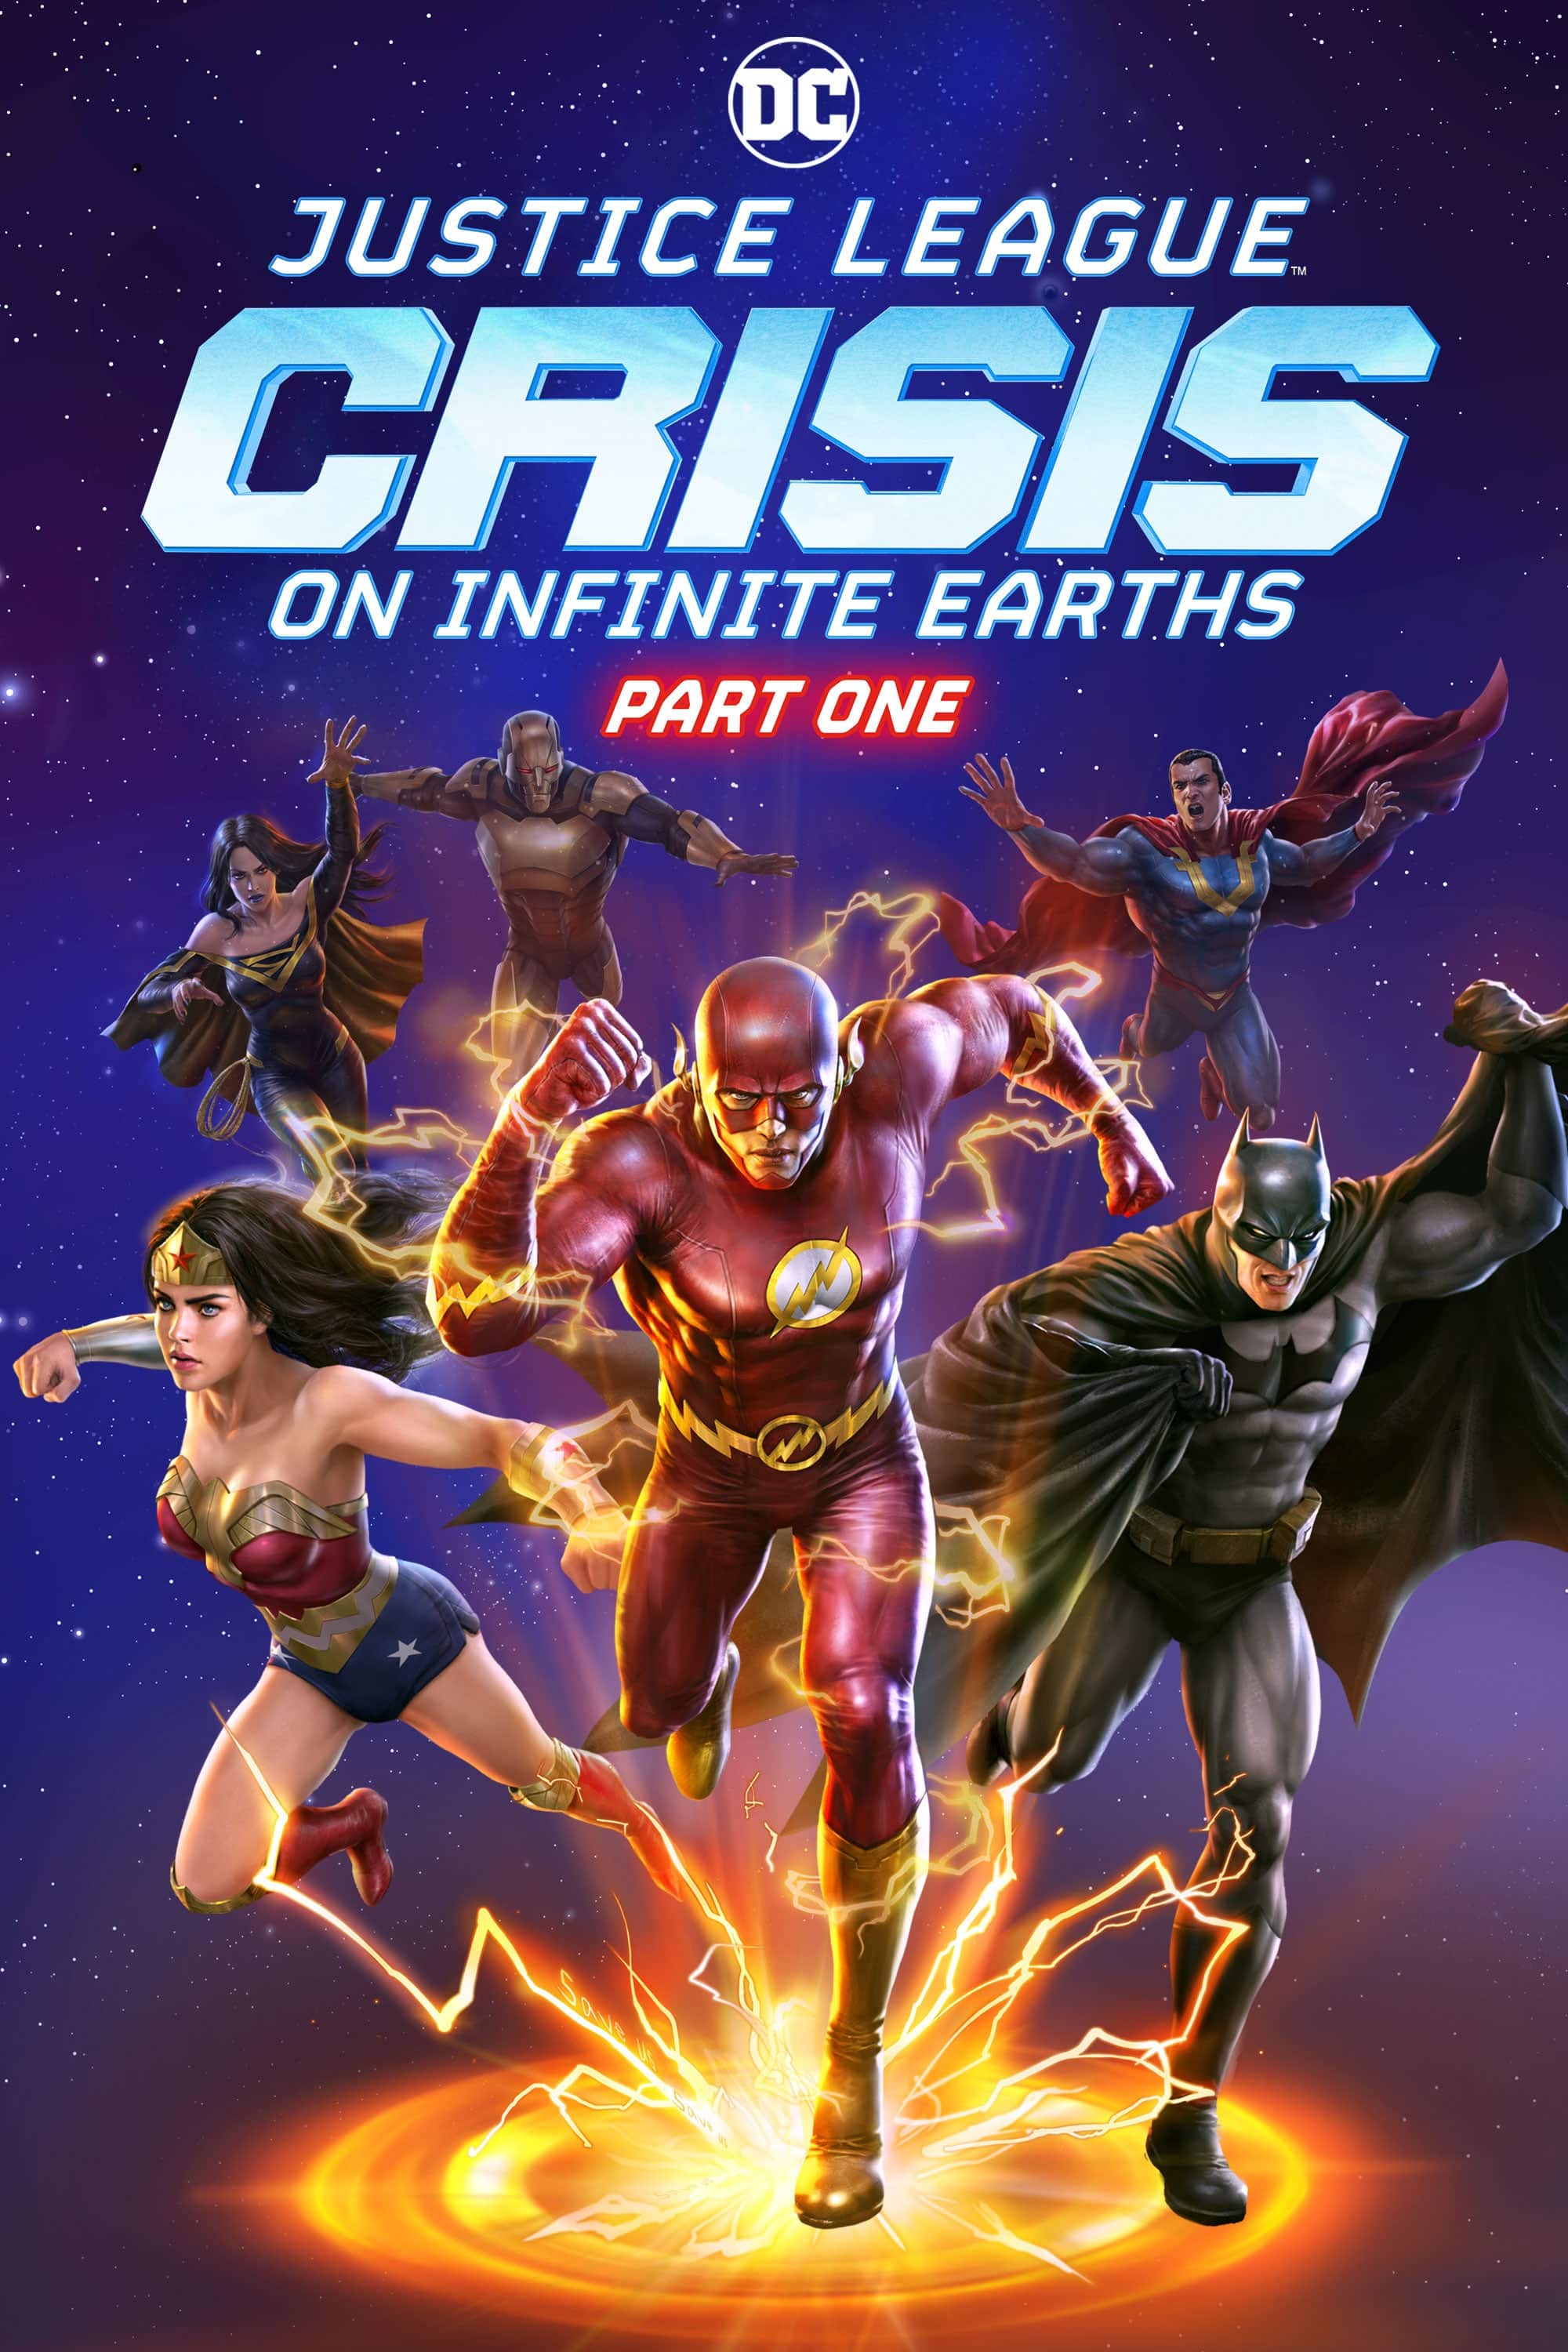 Release details revealed for JUSTICE LEAGUE: CRISIS ON INFINITE EARTHS  animated film